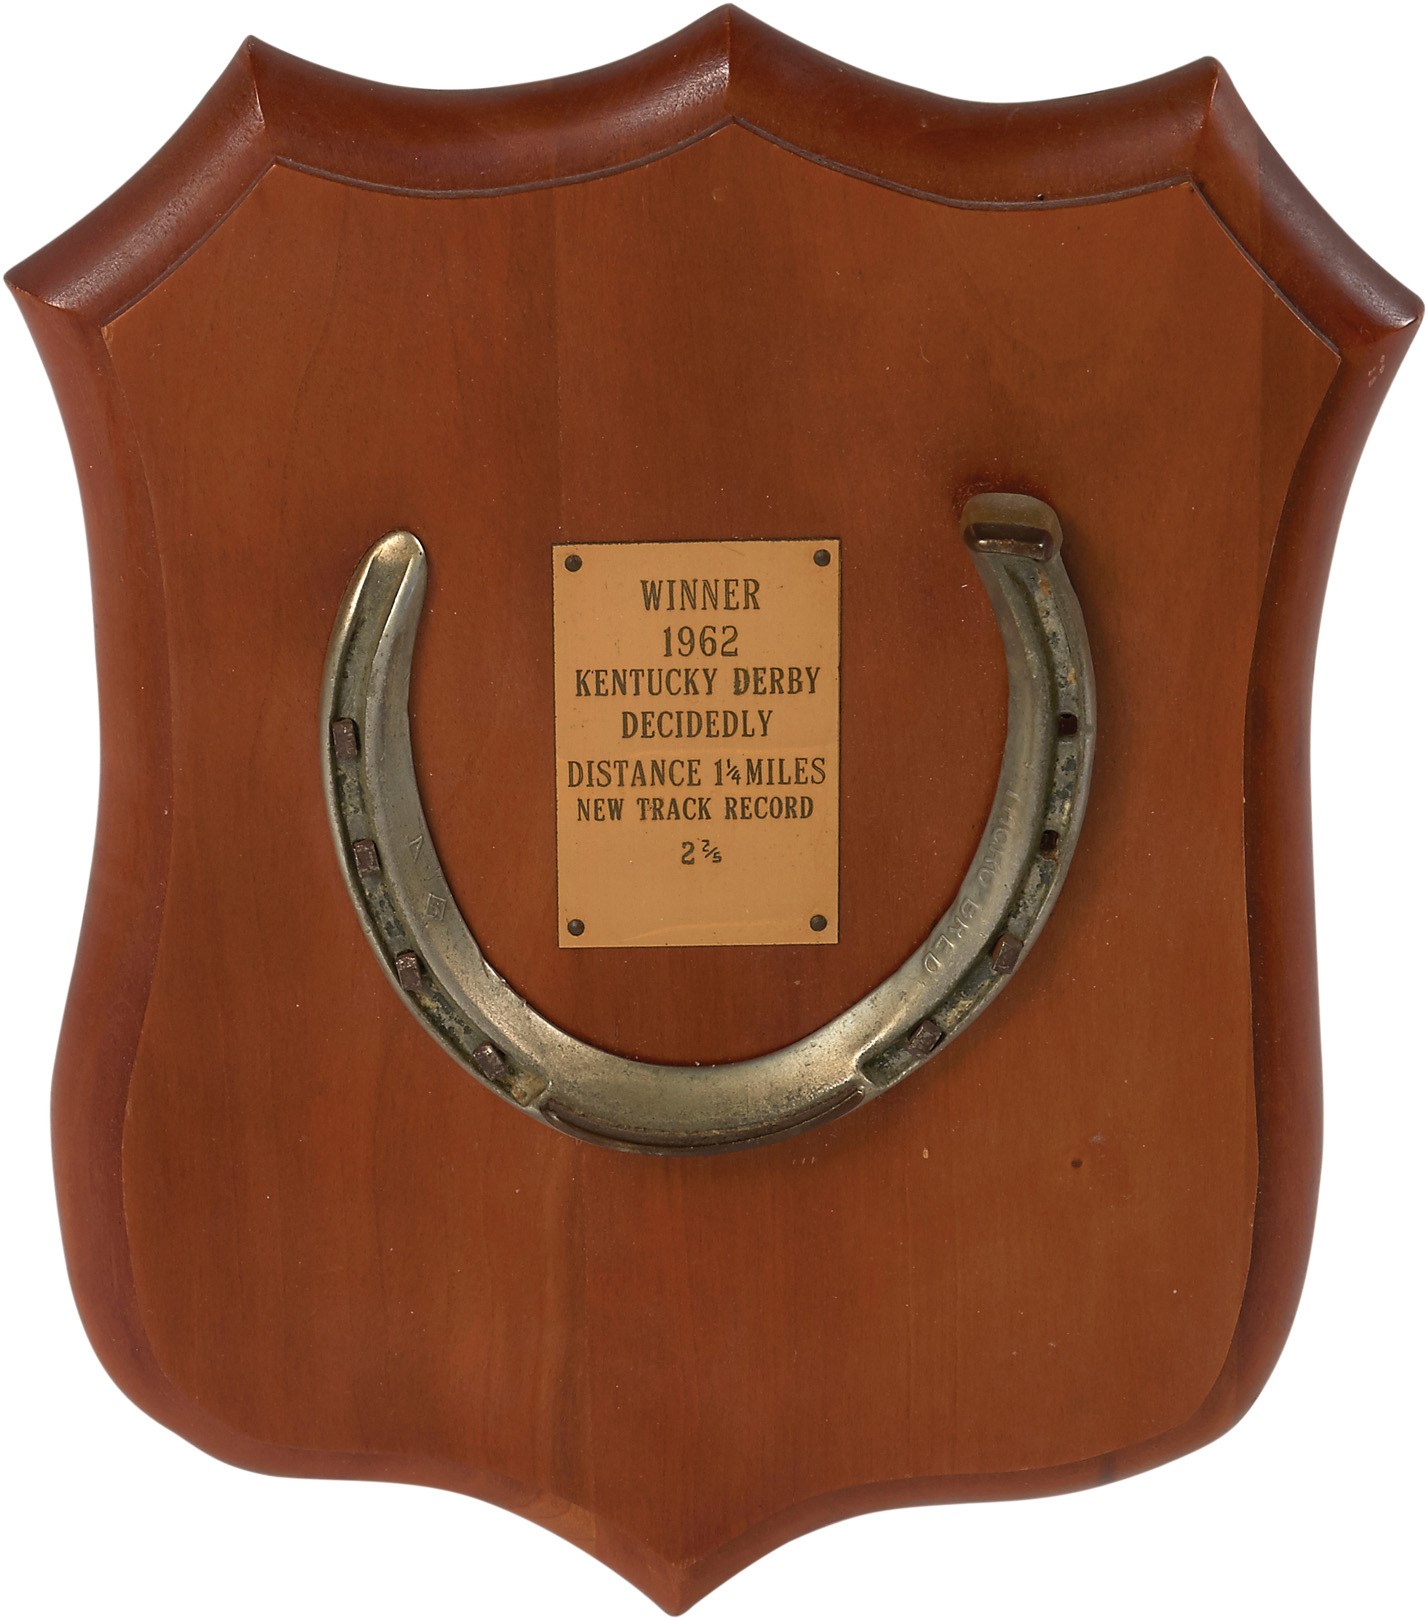 - 1962 "Decidedly" Kentucky Derby Record Breaking Horseshoe ("New Track Record")